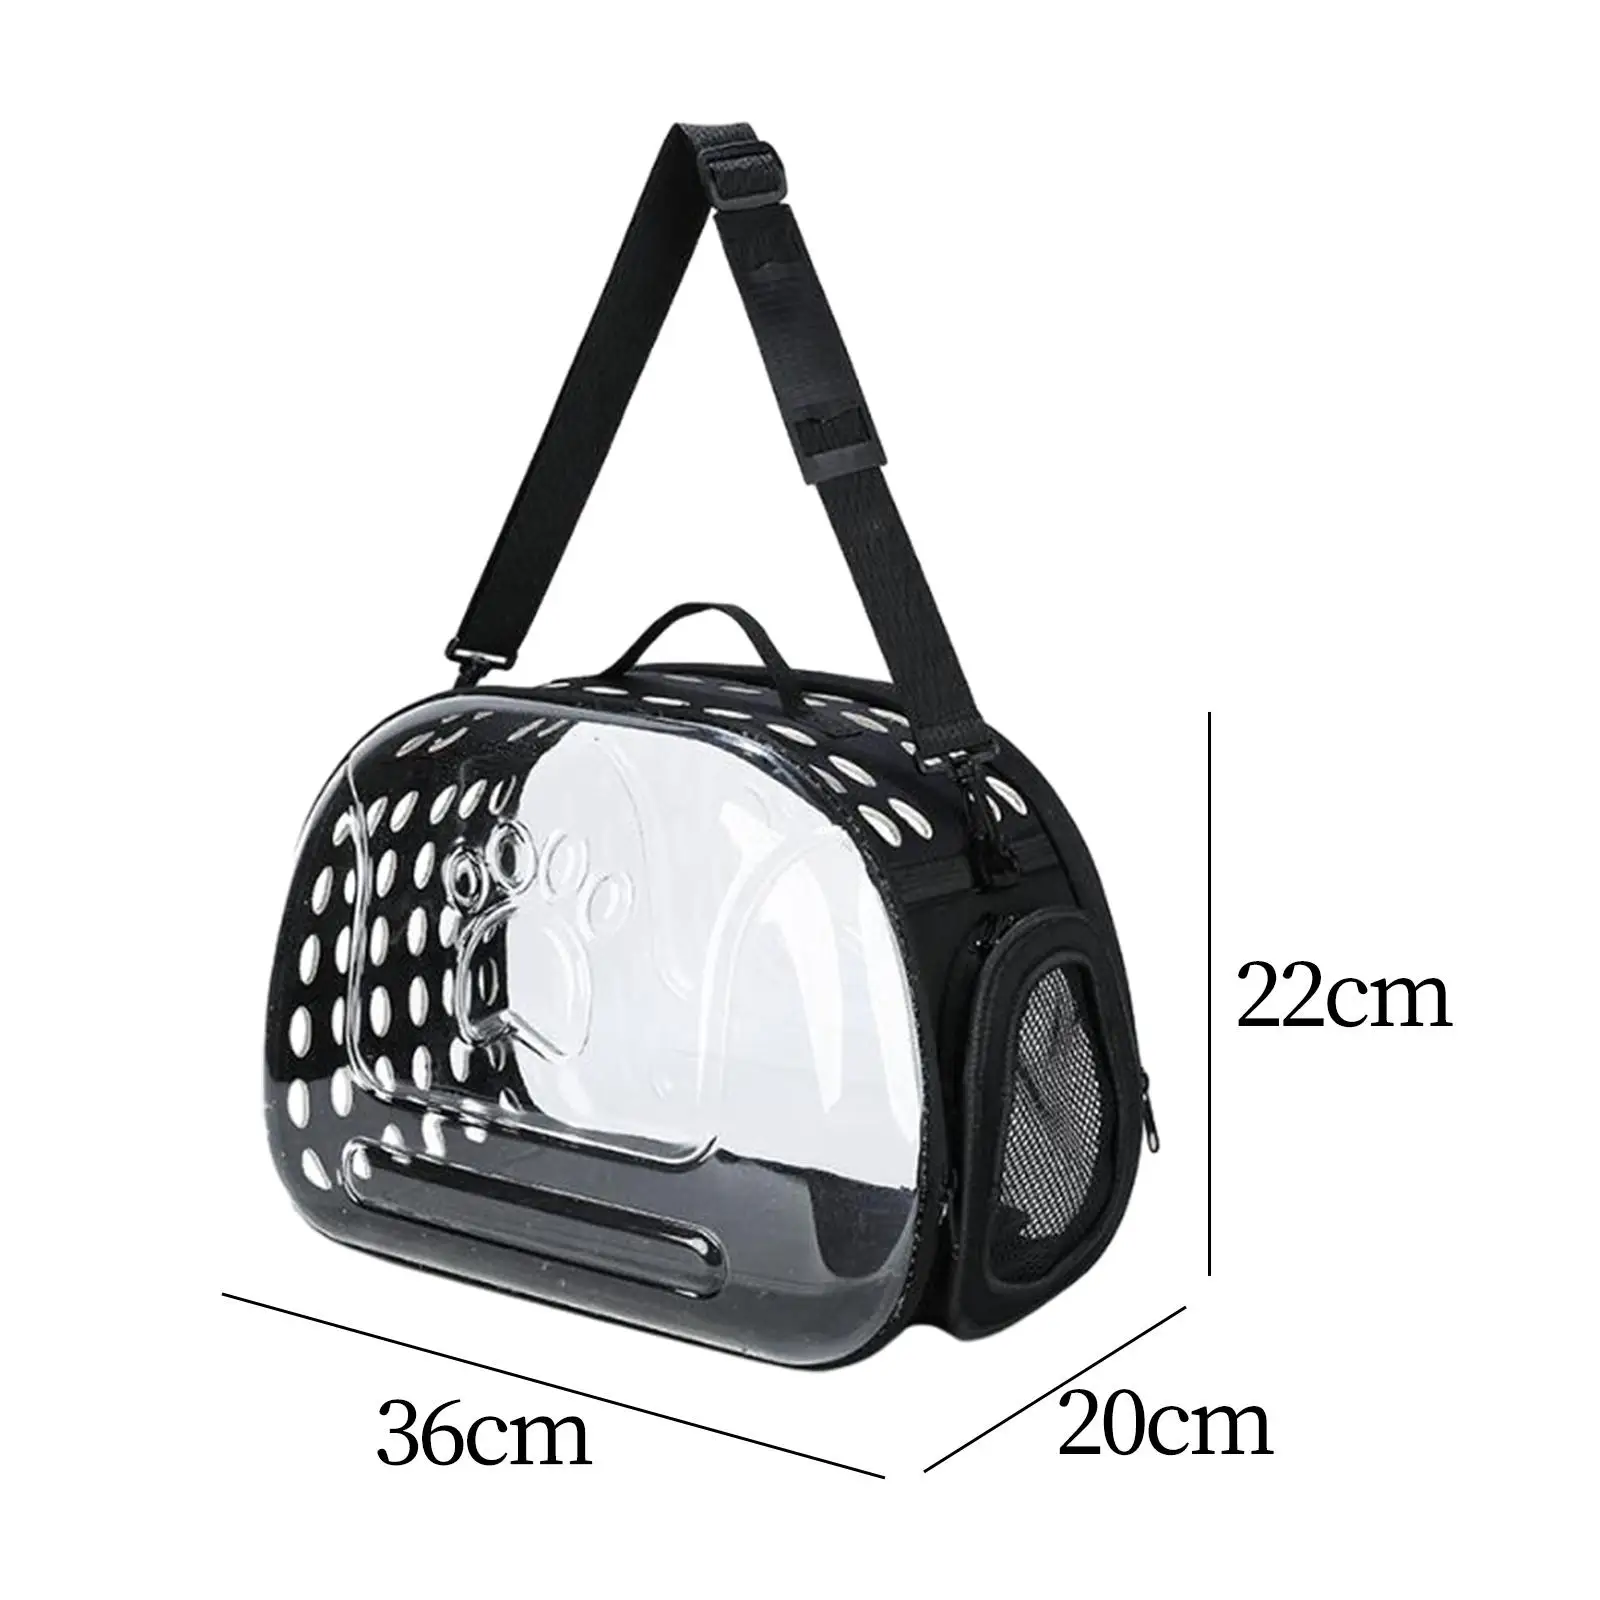 Portable Cat Carried Bag Transparent Cat Carrier for Puppy Travel Hiking